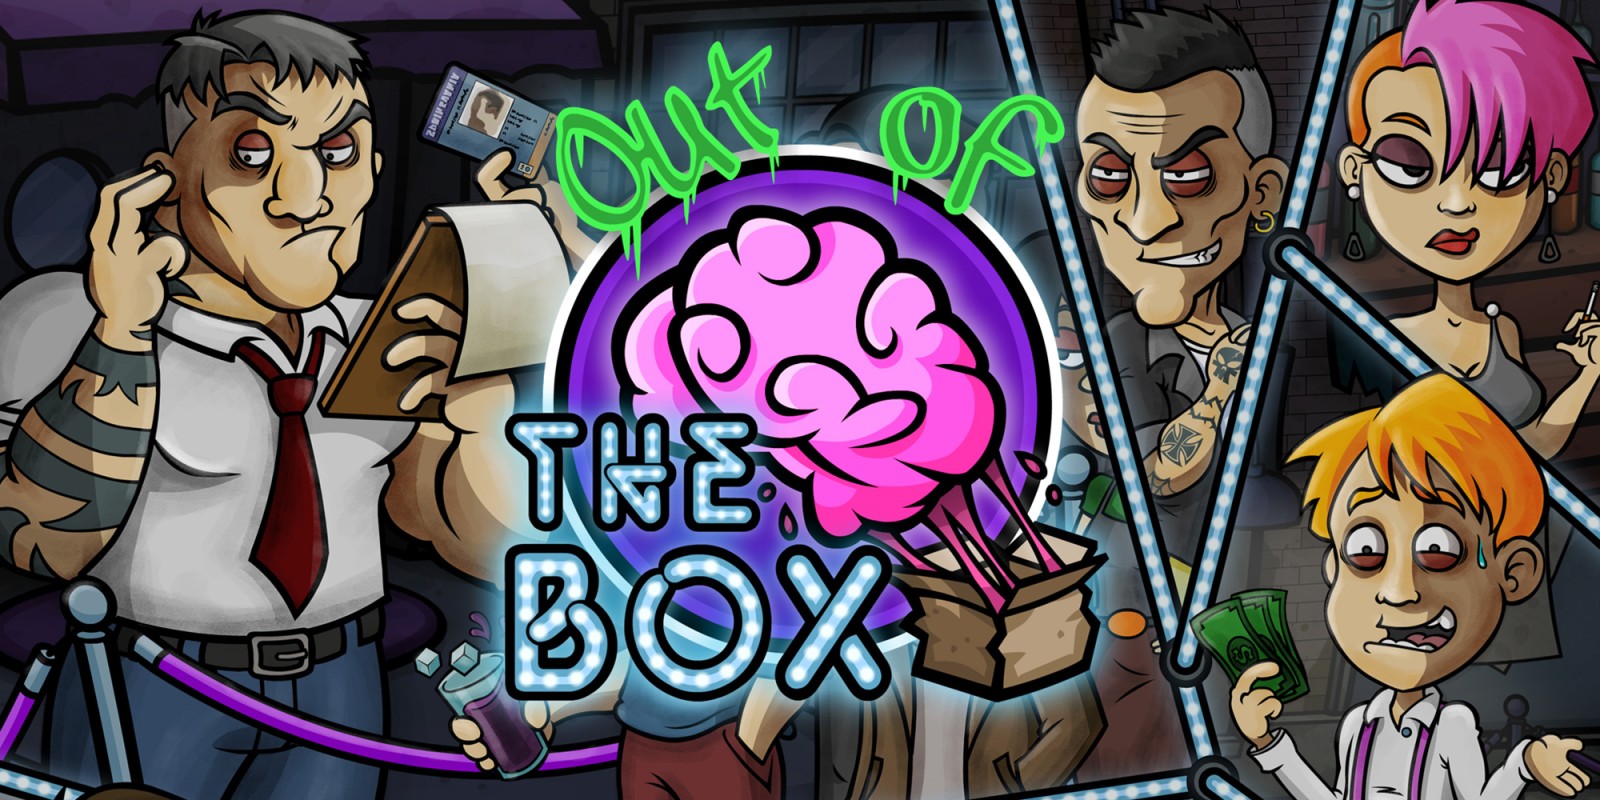 Out of The Box